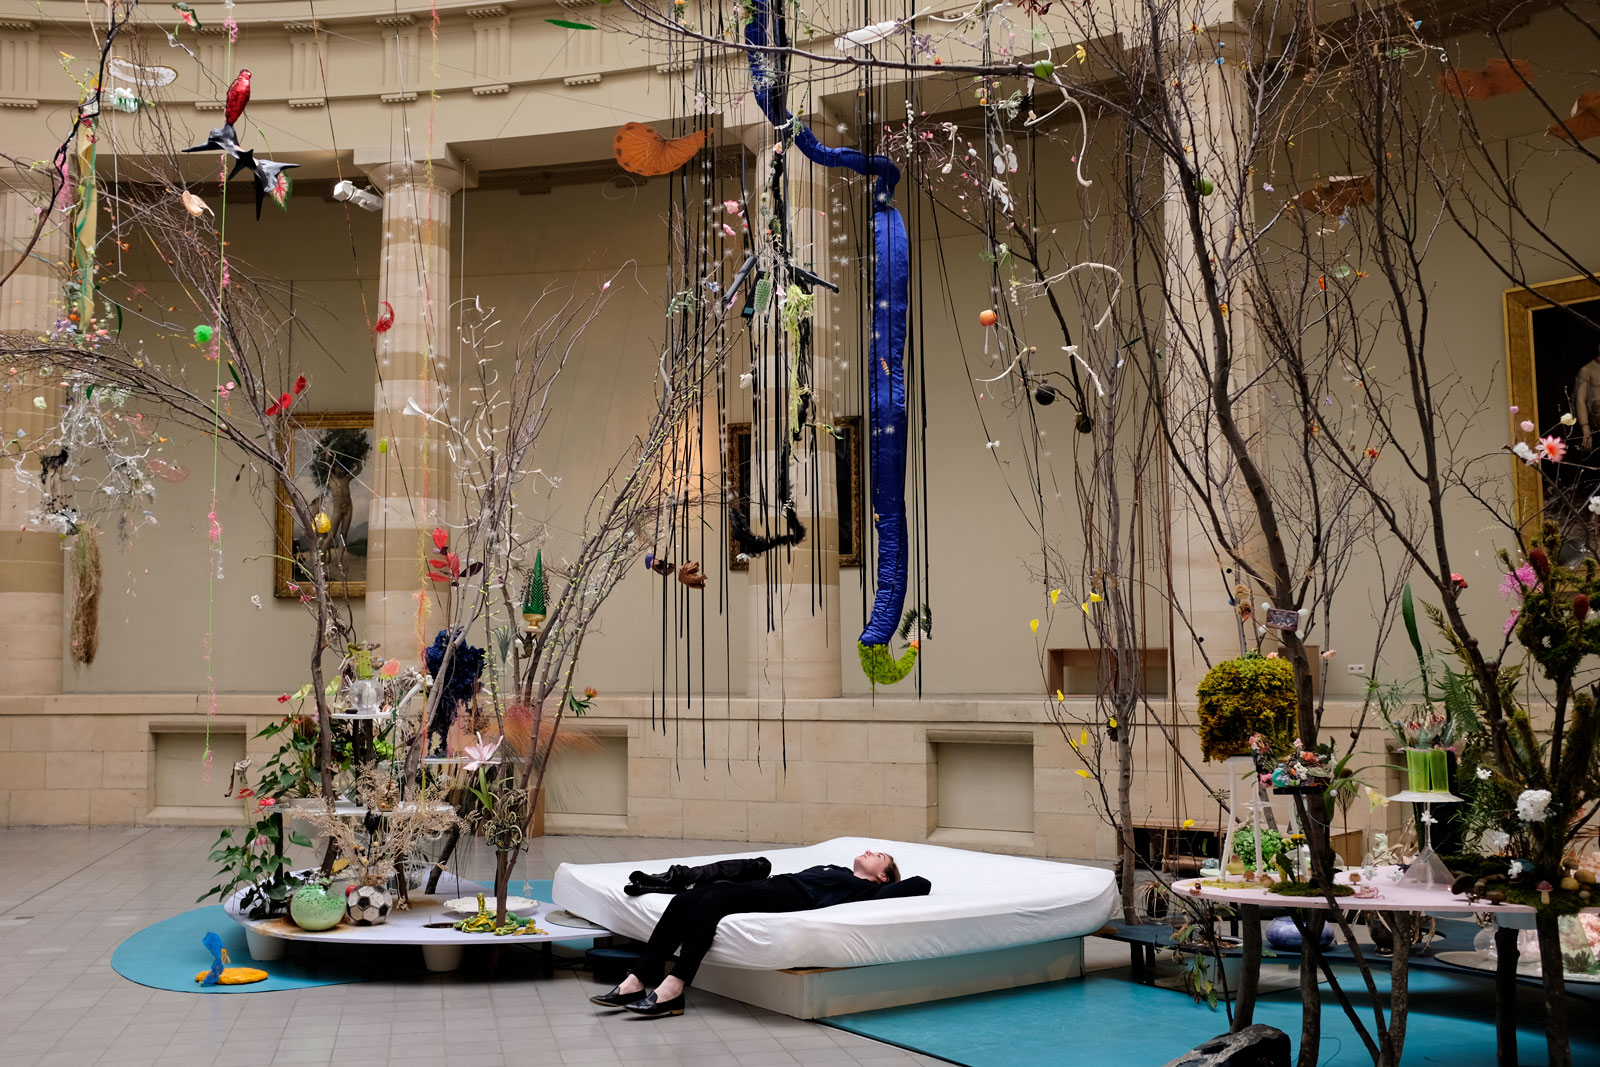 Alyssa lies down on a mattress and peers up at art in a Ghent museum